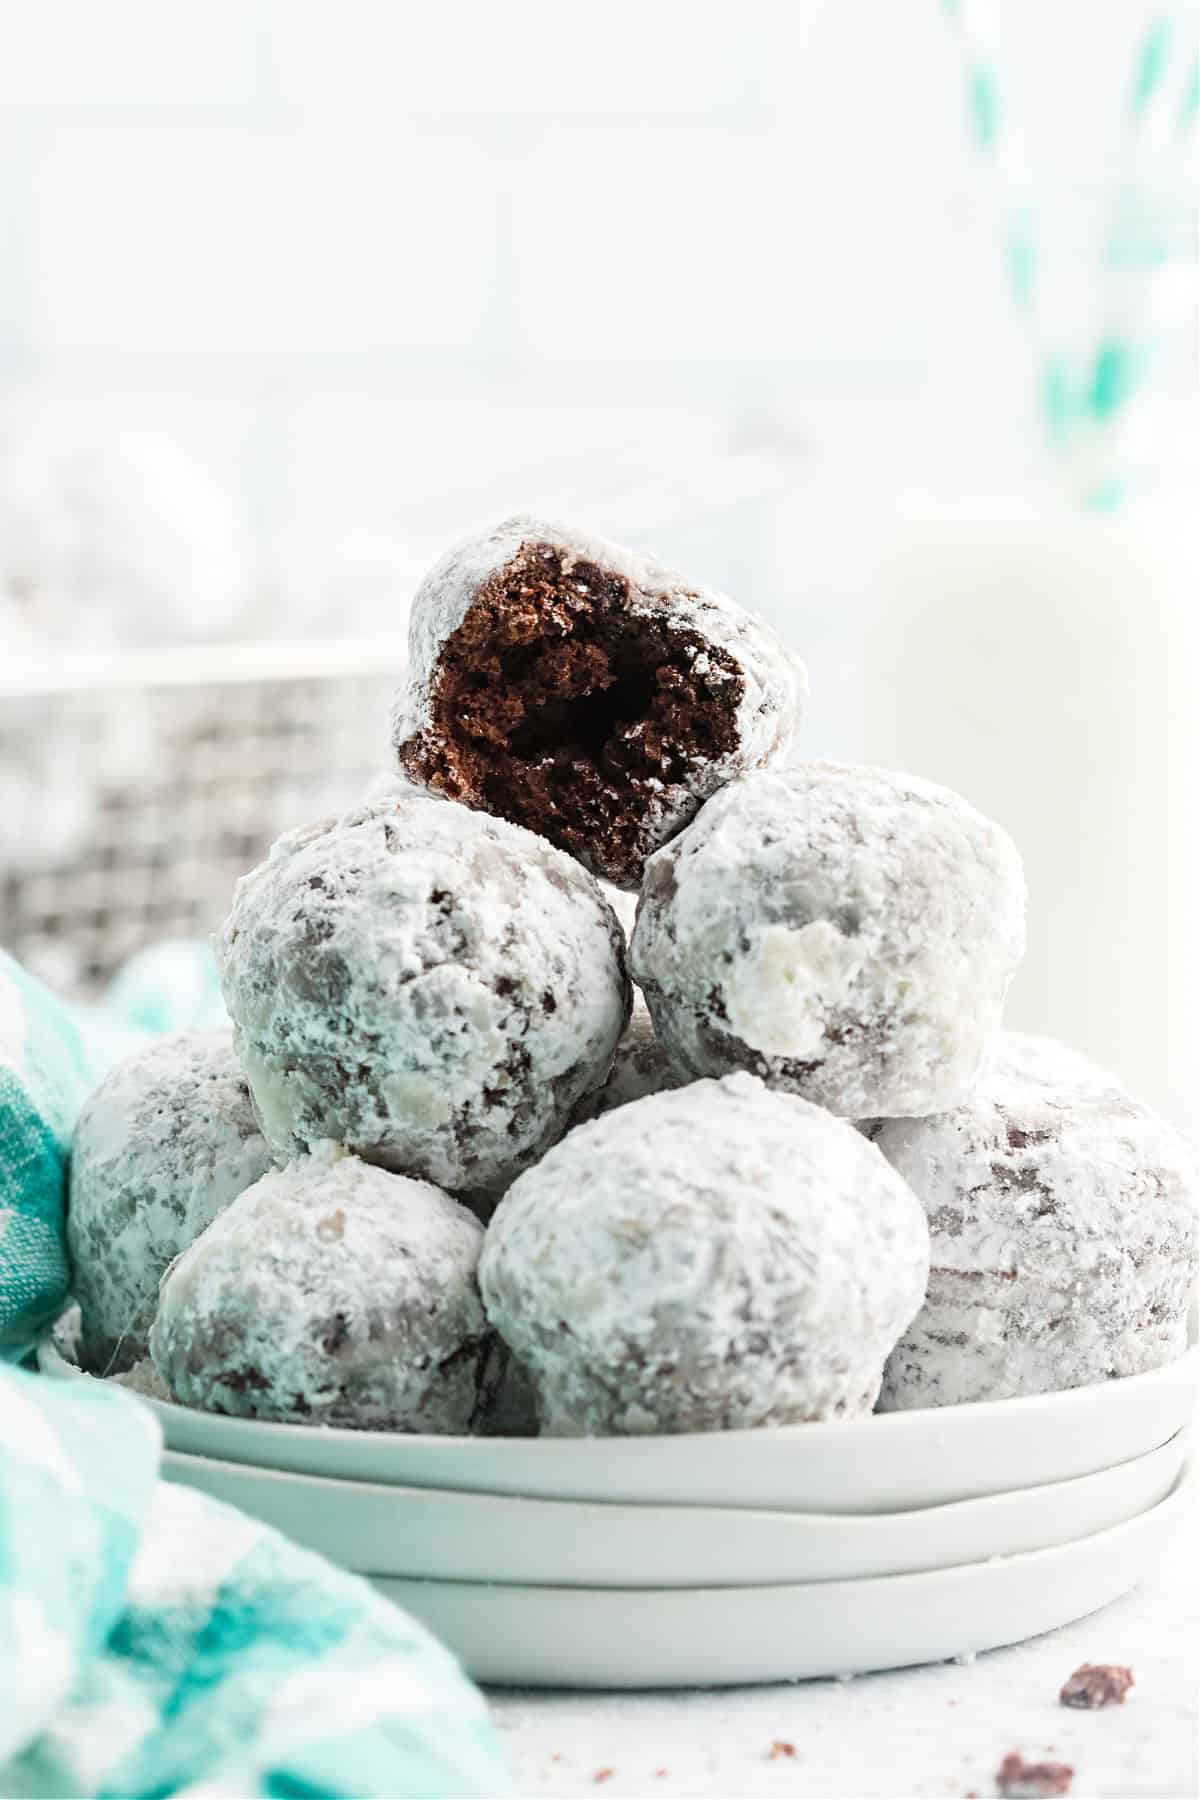 Stack of chocolate donuts rolled in powdered sugar.